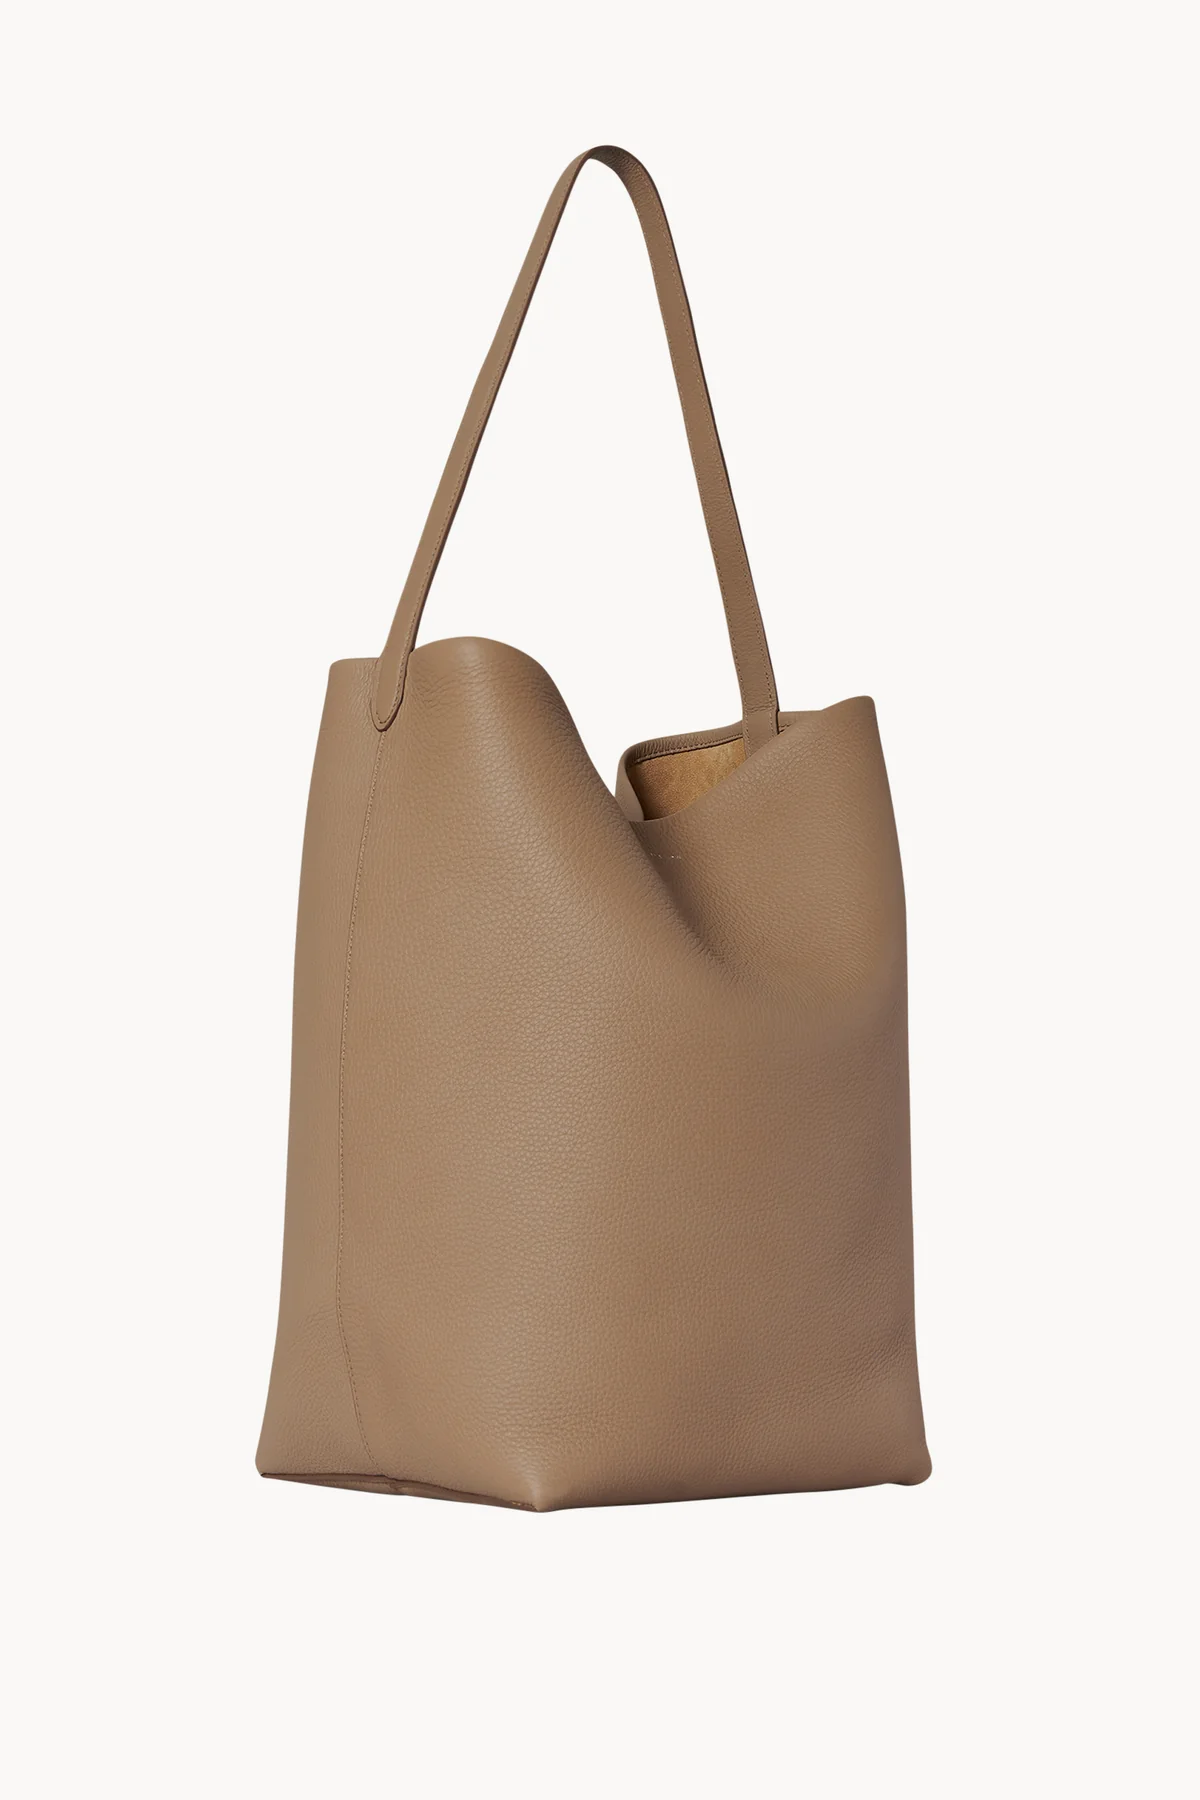 THE ROW N/S Park small leather tote